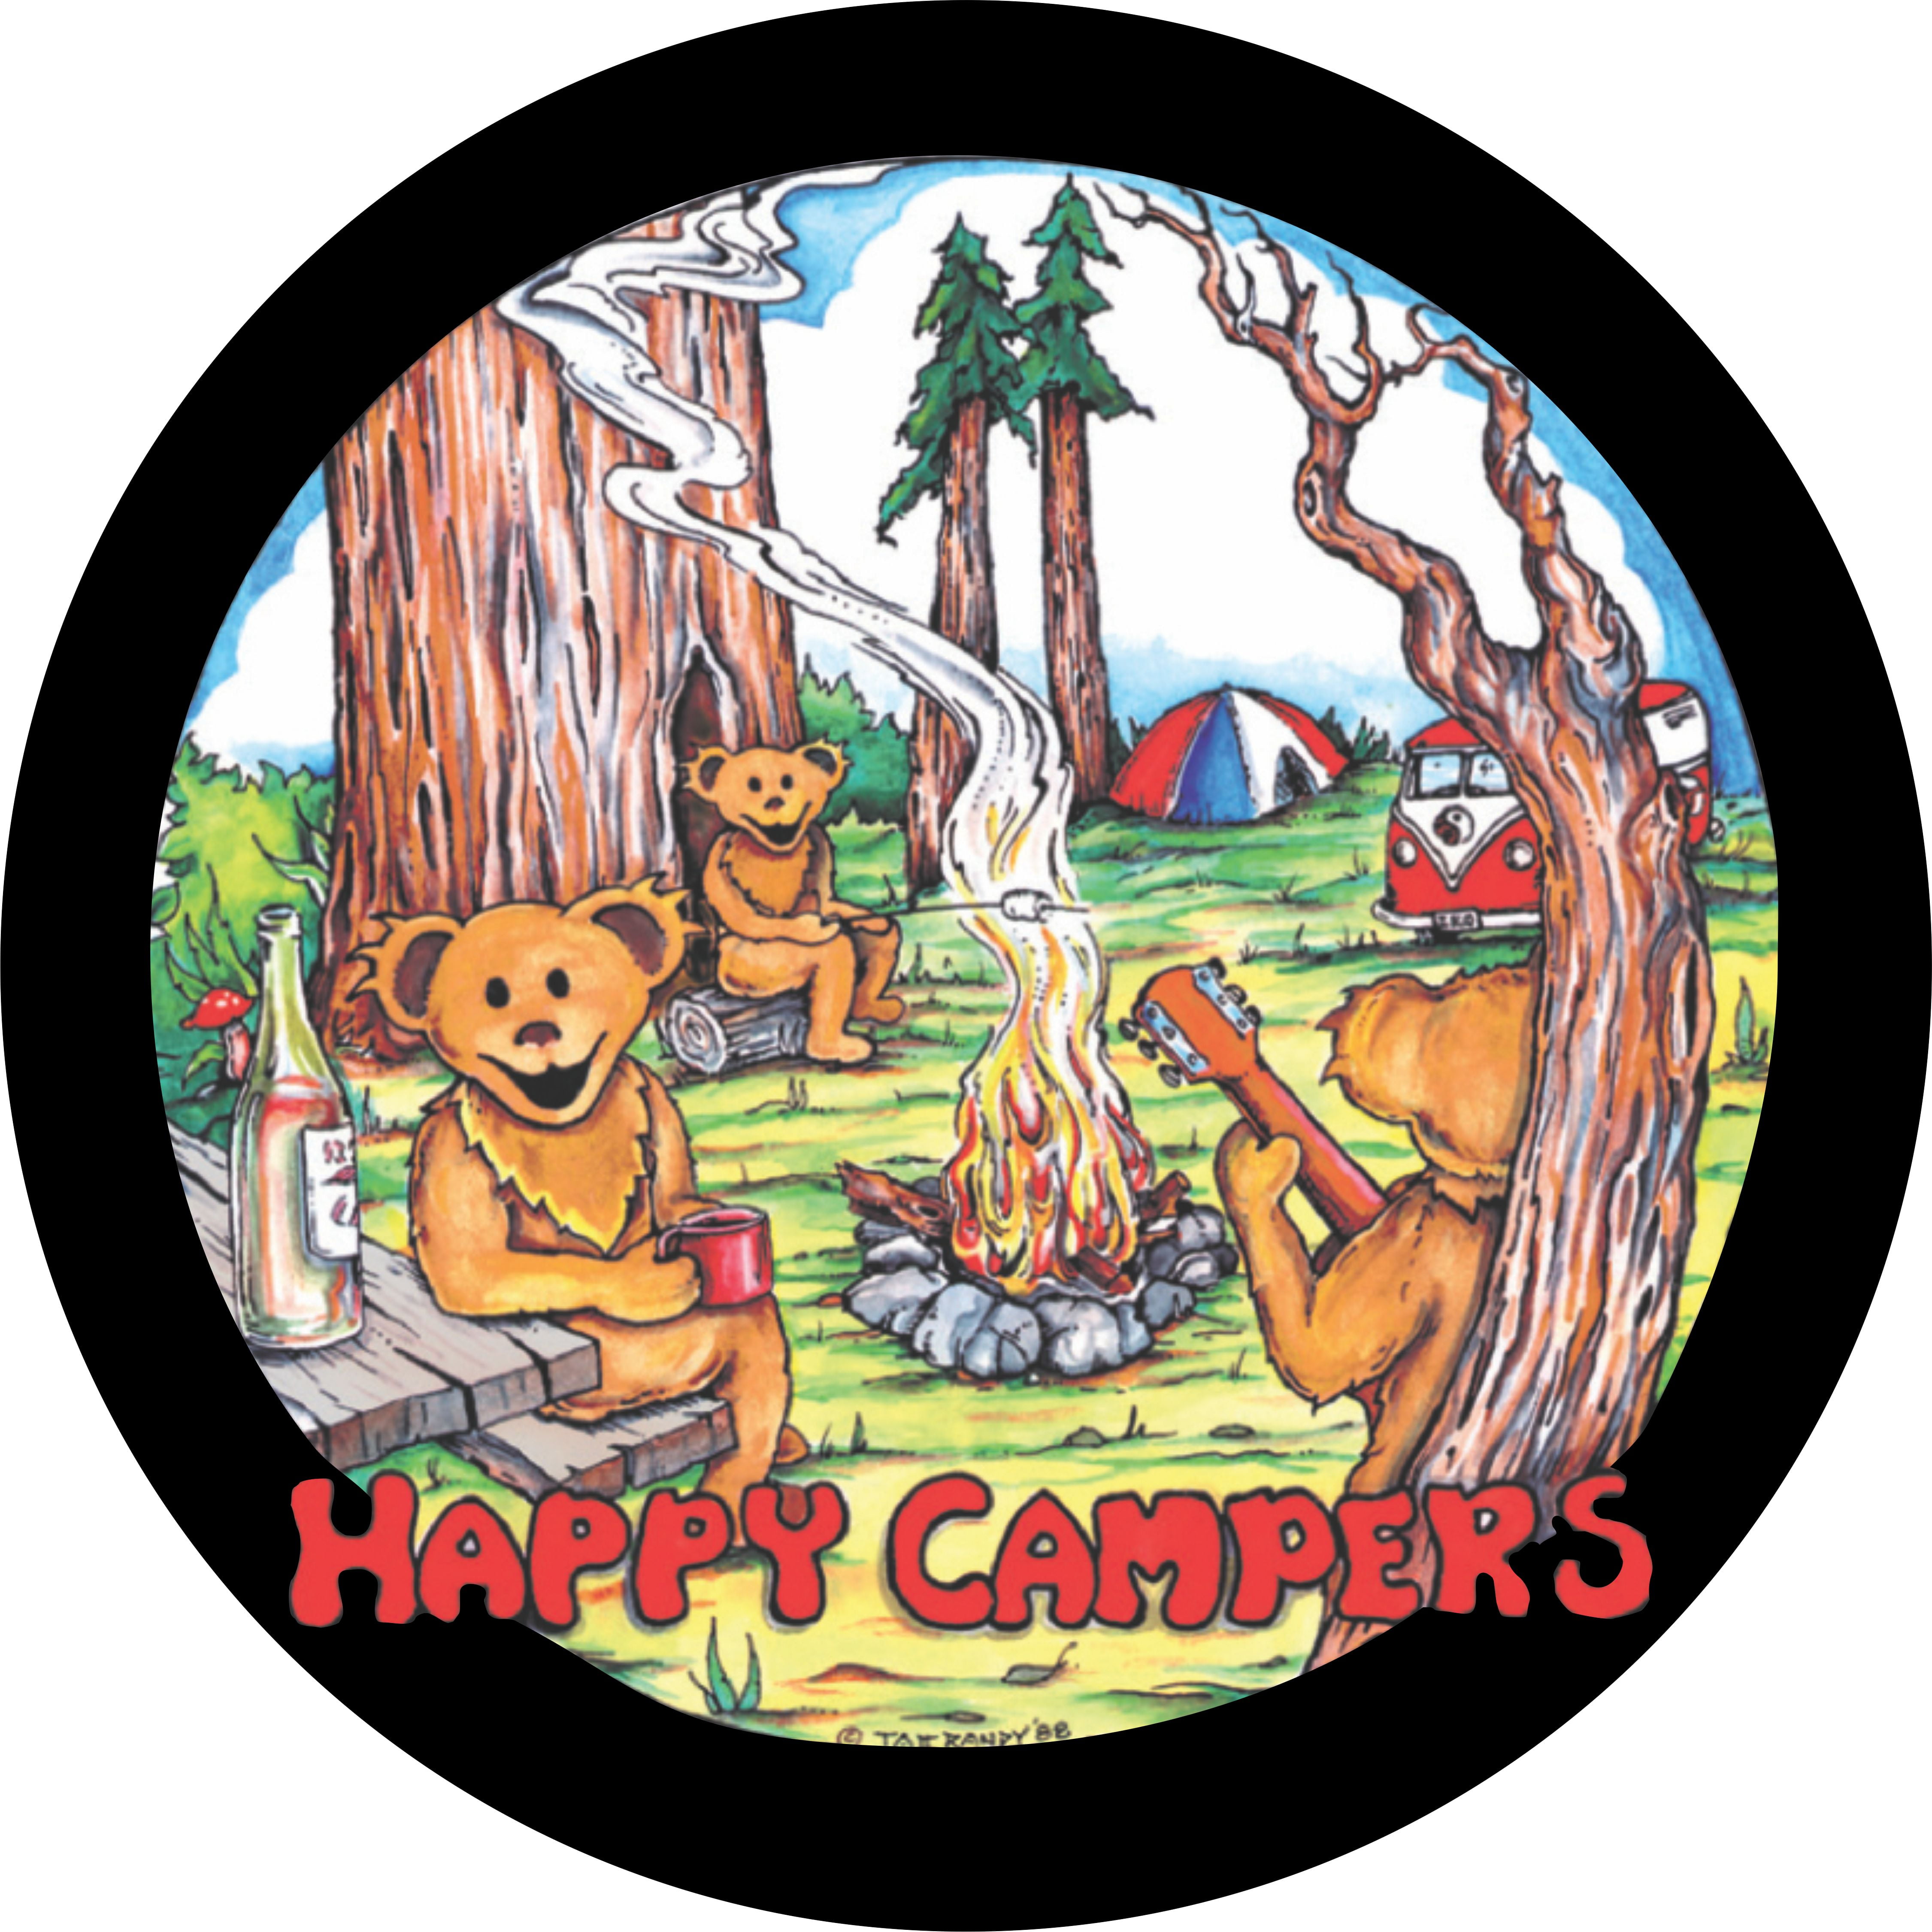 Happy Camper Bear Universe Exploration Tire Covers American Flag Wheel Cover Protectors Weatherproof UV Protection Spare Tire Cover Universal Fit for RV Van SUV Truck Travel Trailer Accessories 